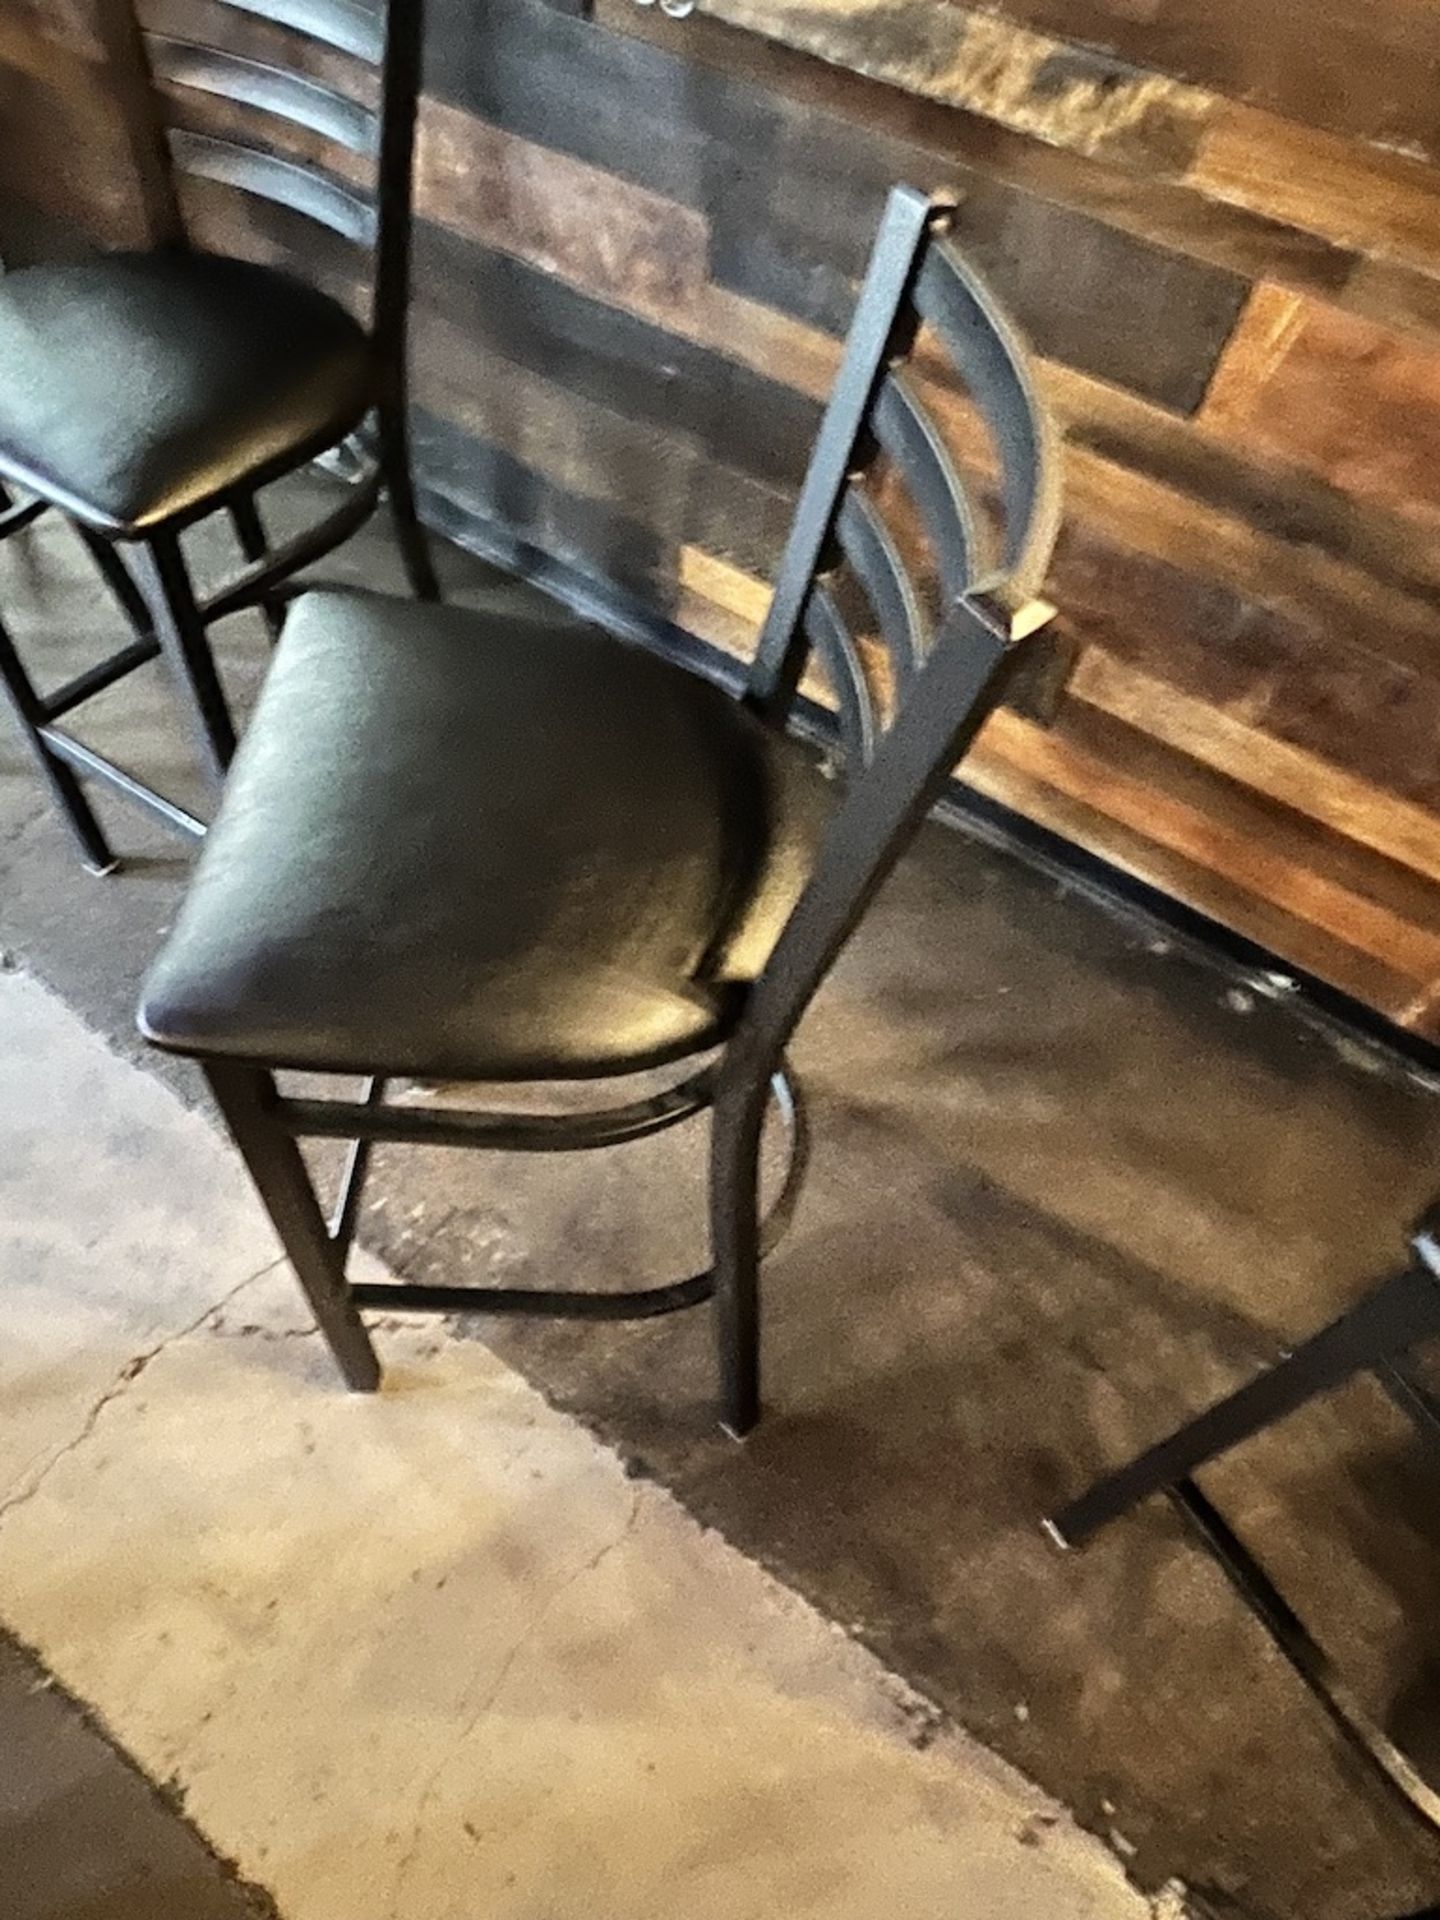 LOT OF: (4) HI-TOP PADDED CHAIRS W/ METAL FRAME - Image 2 of 6